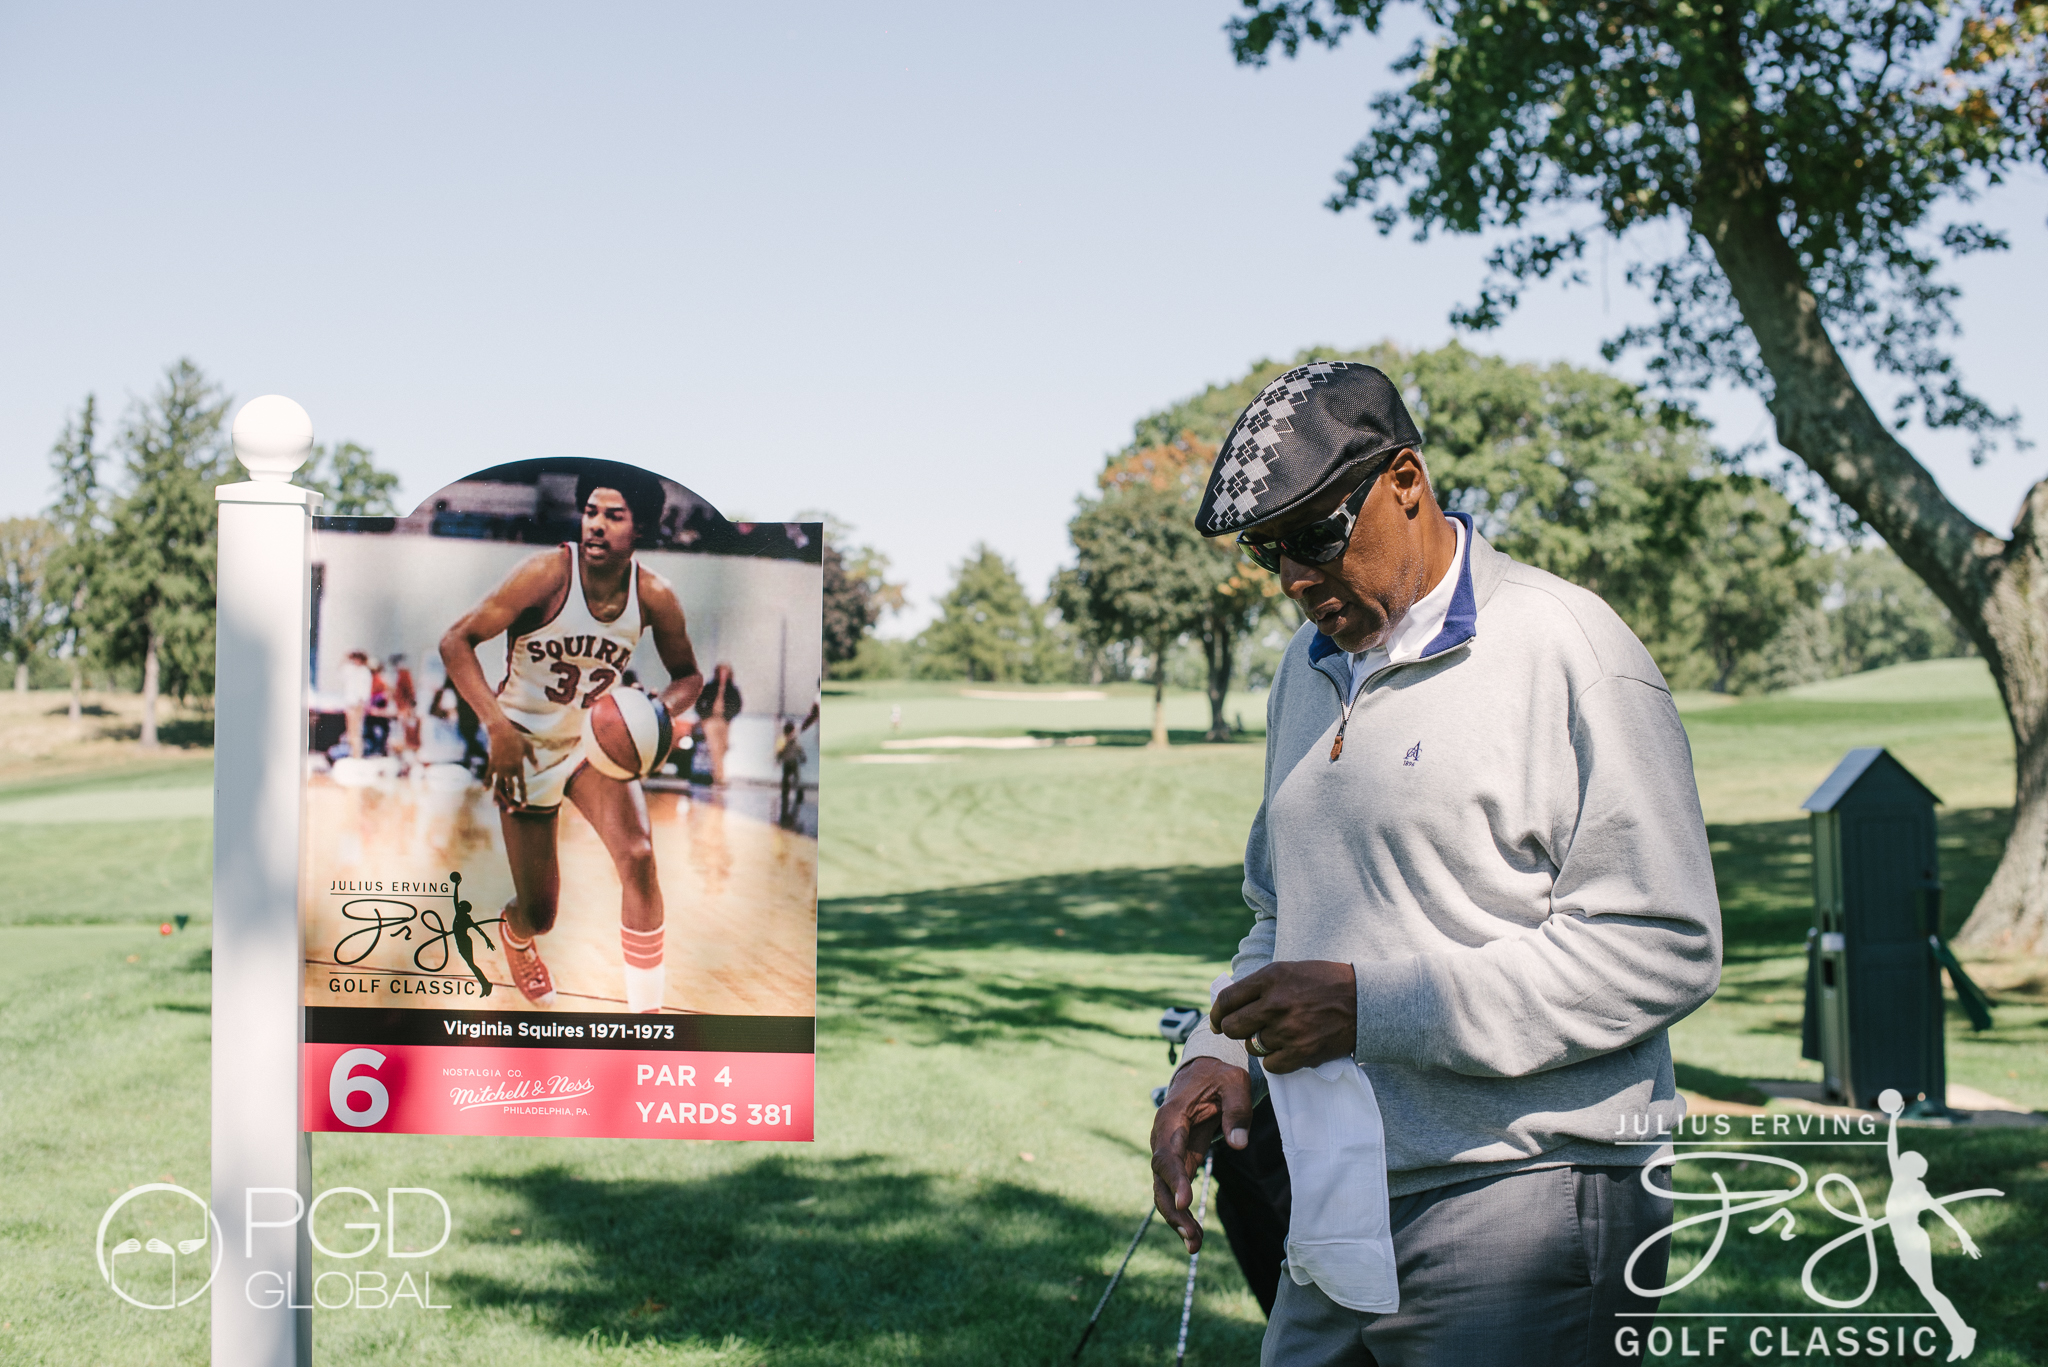 Each hole at the VIP Julius Erving Golf Classic featured signature moments from Ervings’ iconic career